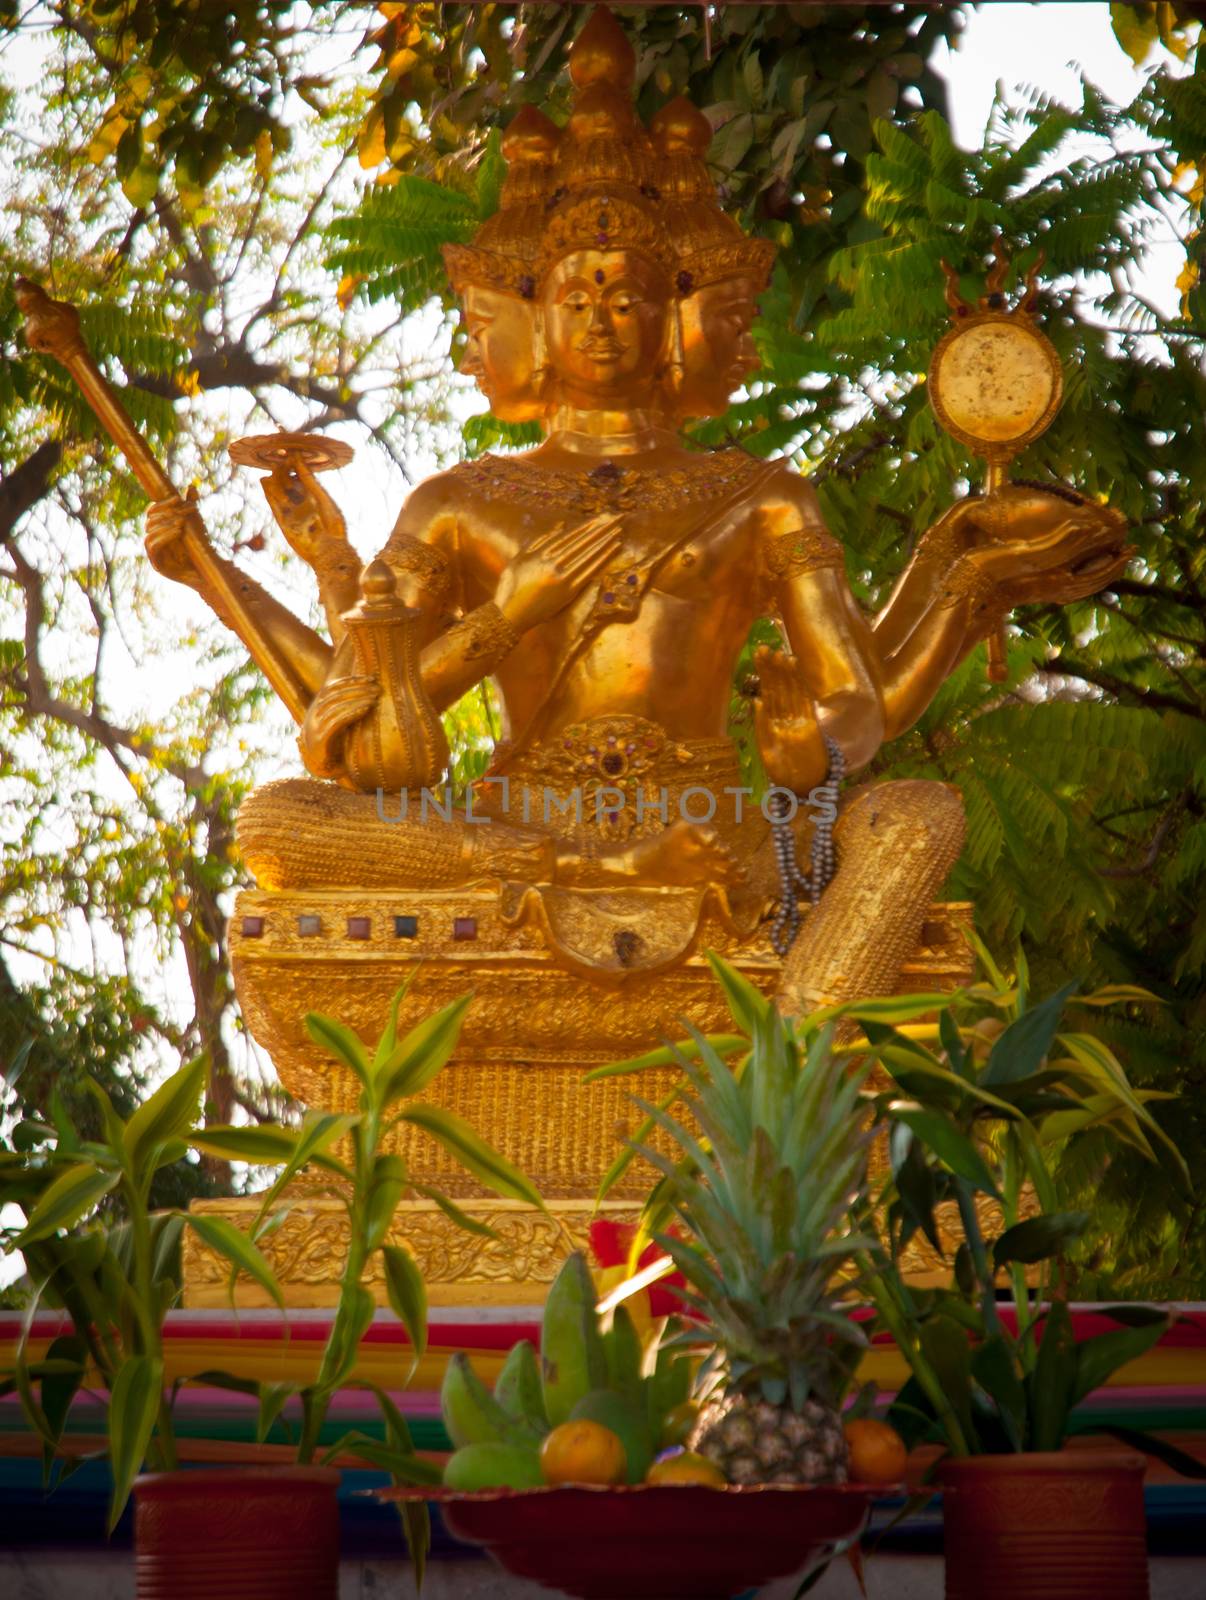 The North of Thailads style of temple